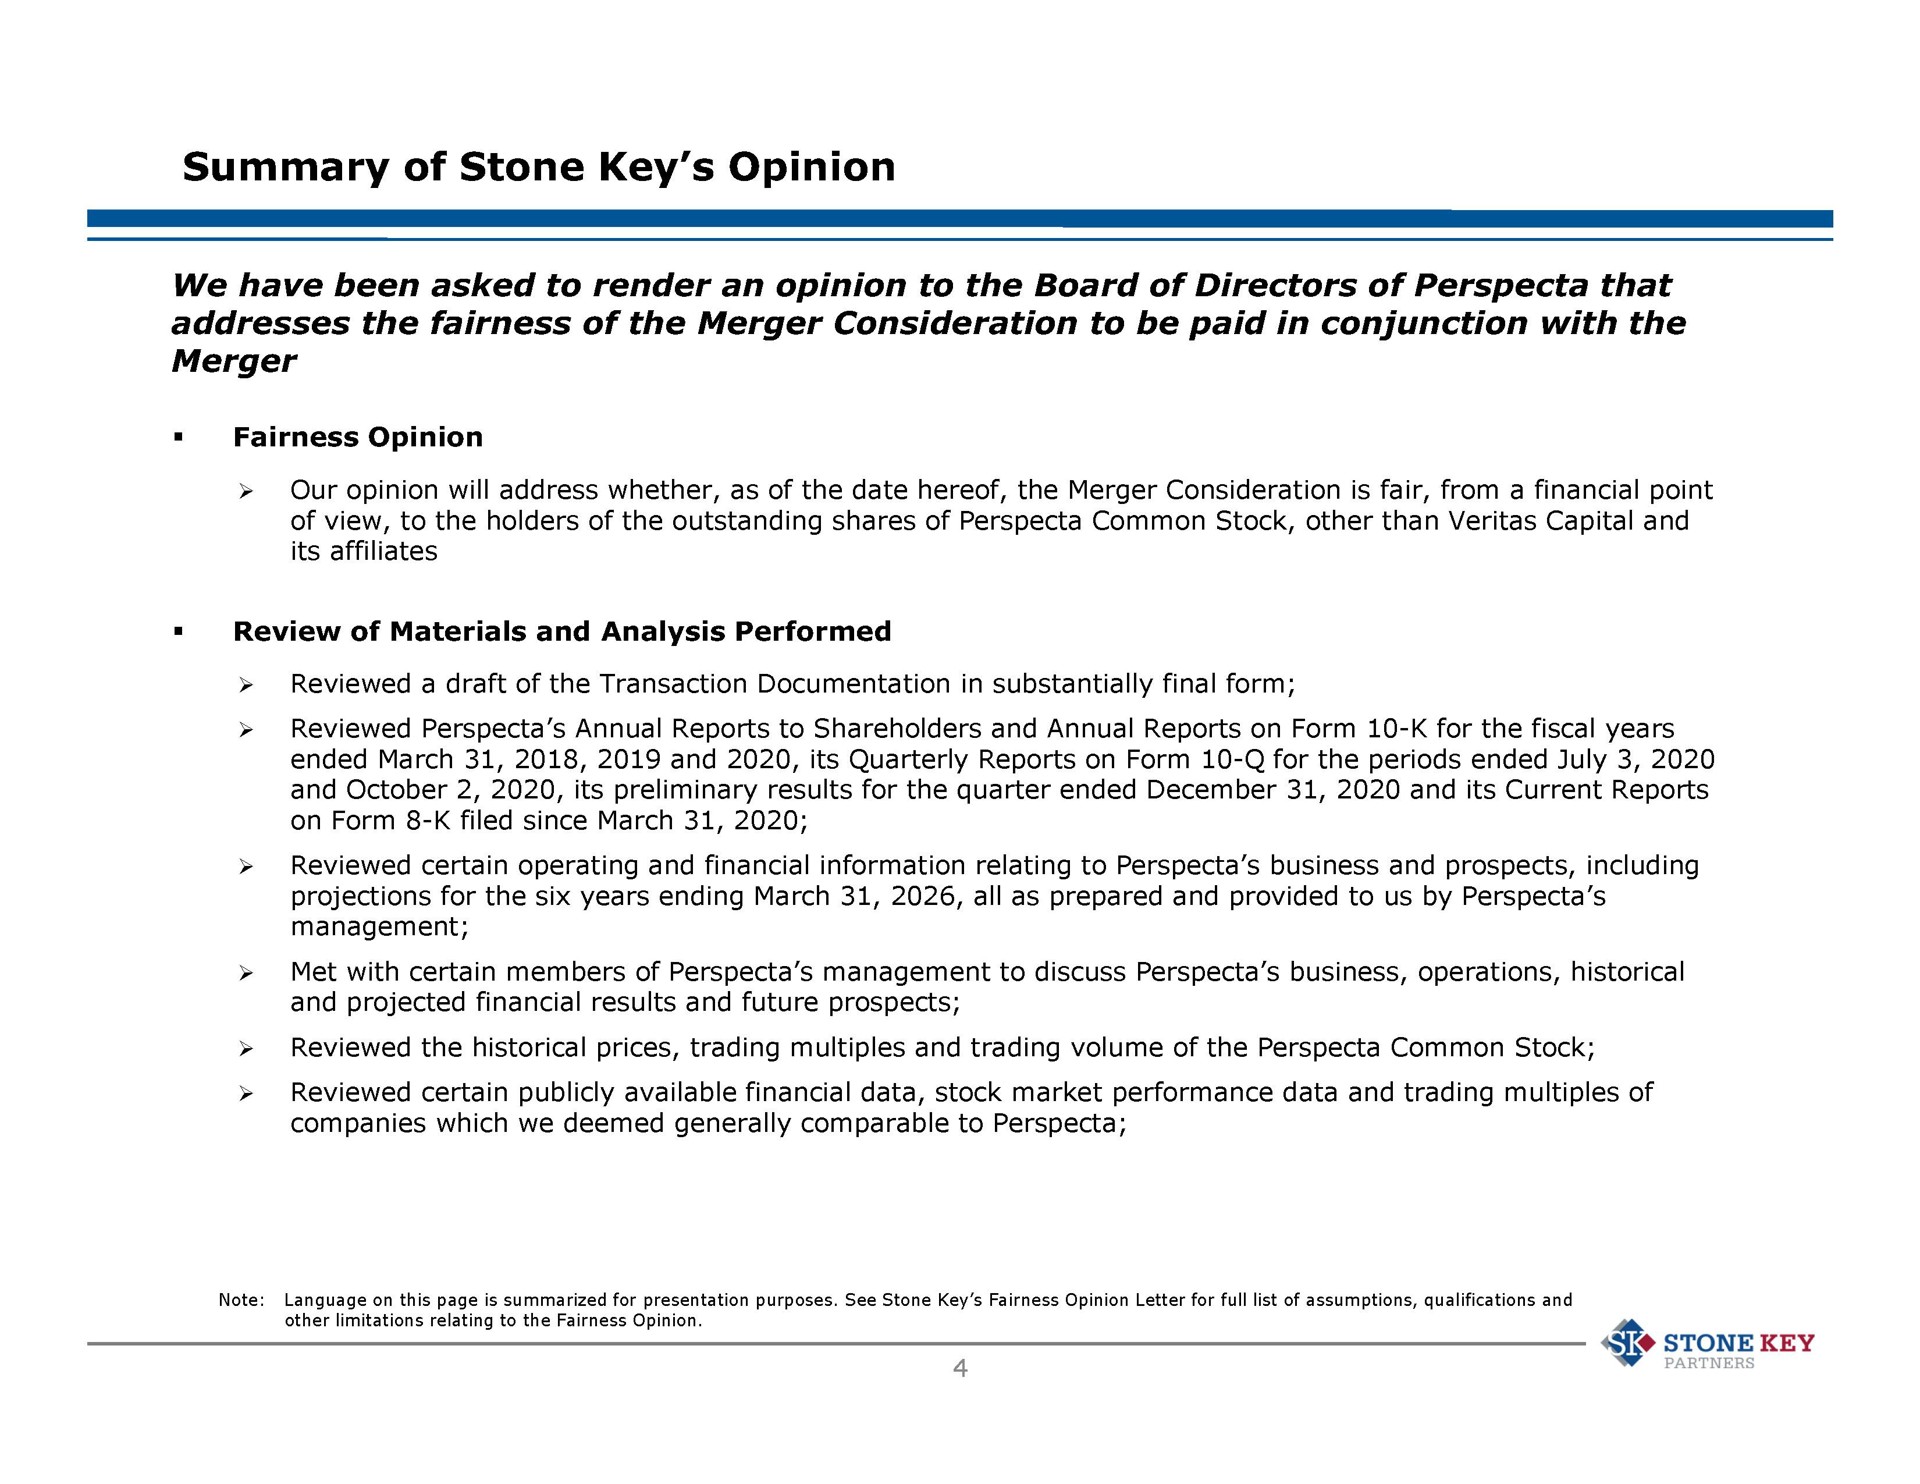 summary of stone key opinion we have been asked to render an opinion to the board of directors of that addresses the fairness of the merger consideration to be paid in conjunction with the stone key | Stone Key Partners